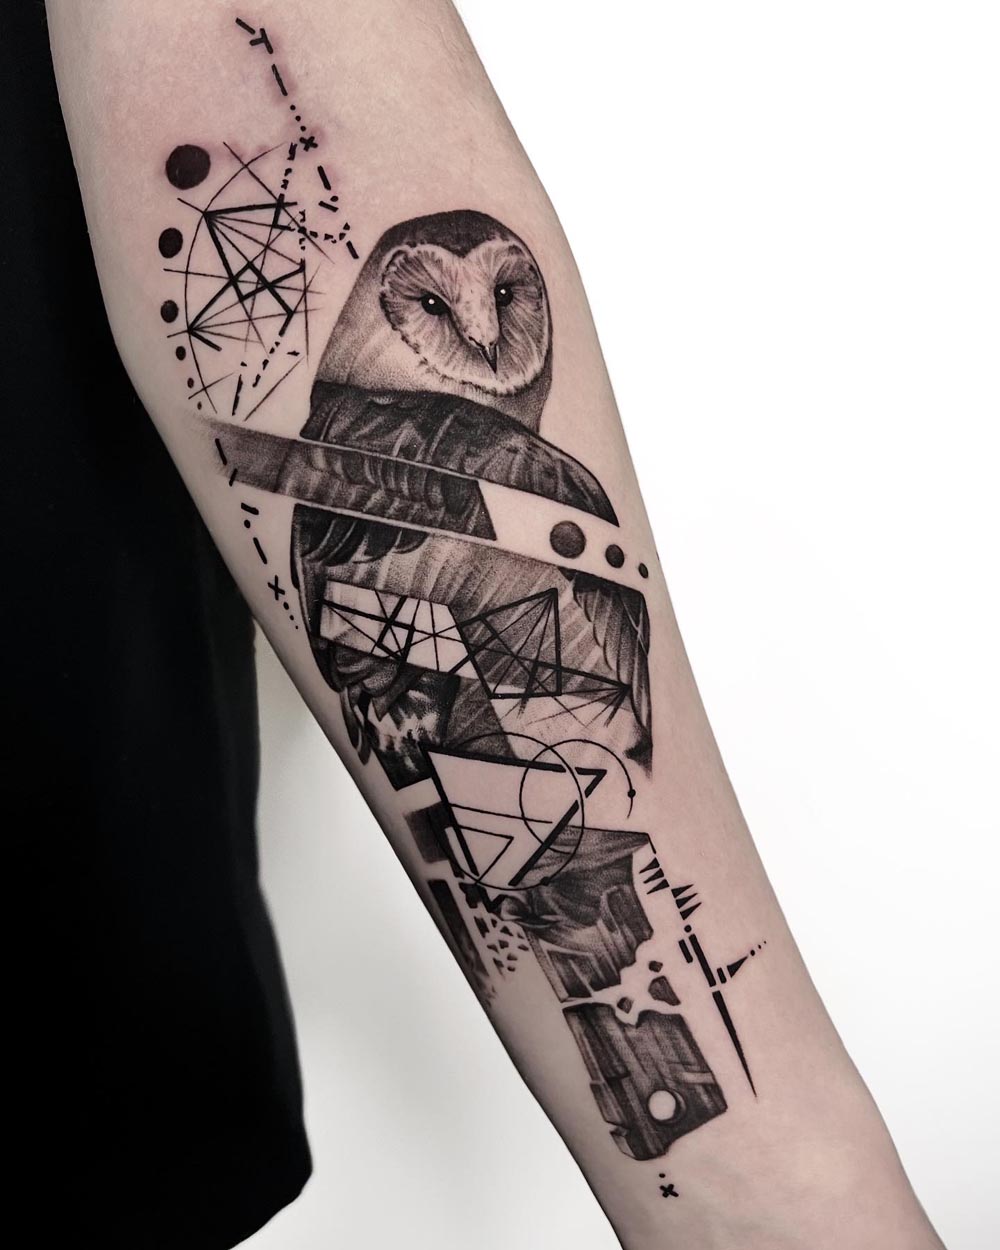 Surrealistic tattoo style by Mark D - Design Swan